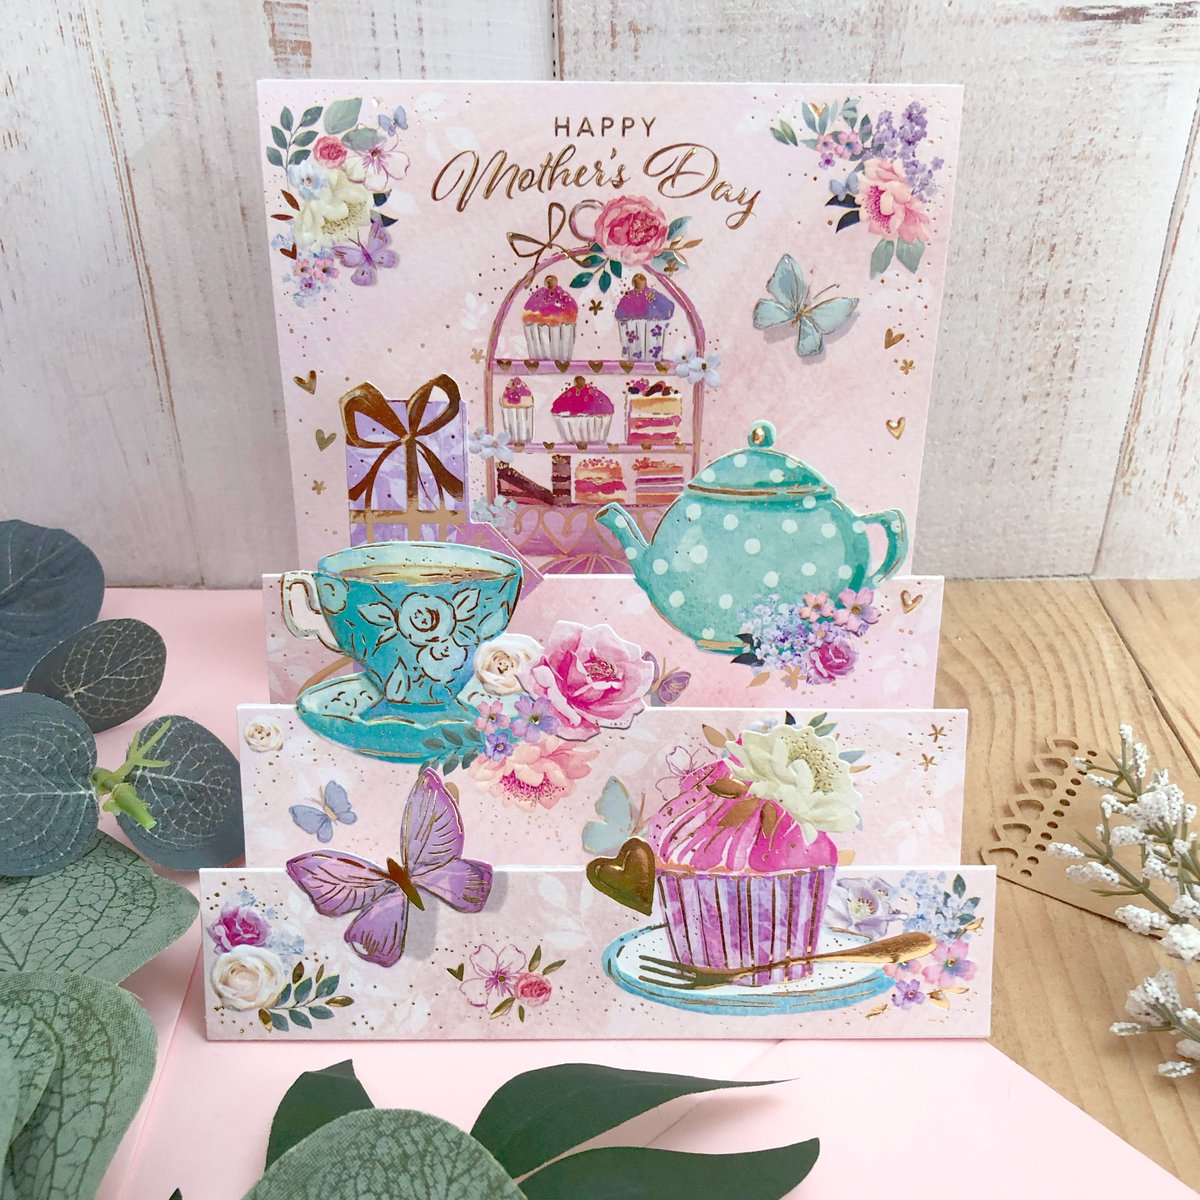 Are you ready for Mother's Day? 🌸 Don't forget to treat those special people this Sunday 10th March 💕 #MothersDay #greetingcards #noeltatt #noeltattgroup